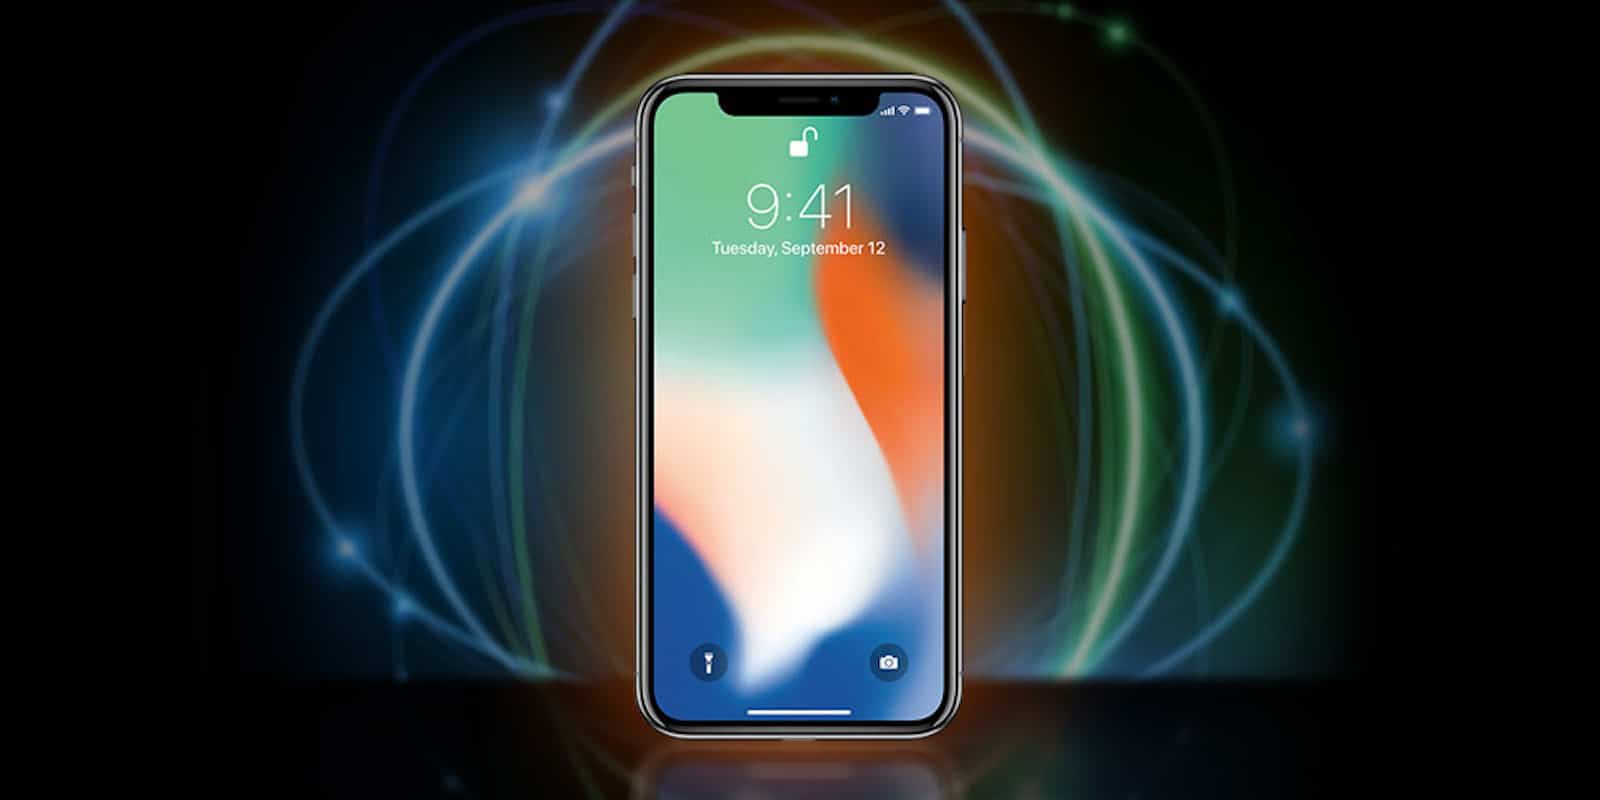 Now's your chance to put the future in your pocket with free iPhone X.